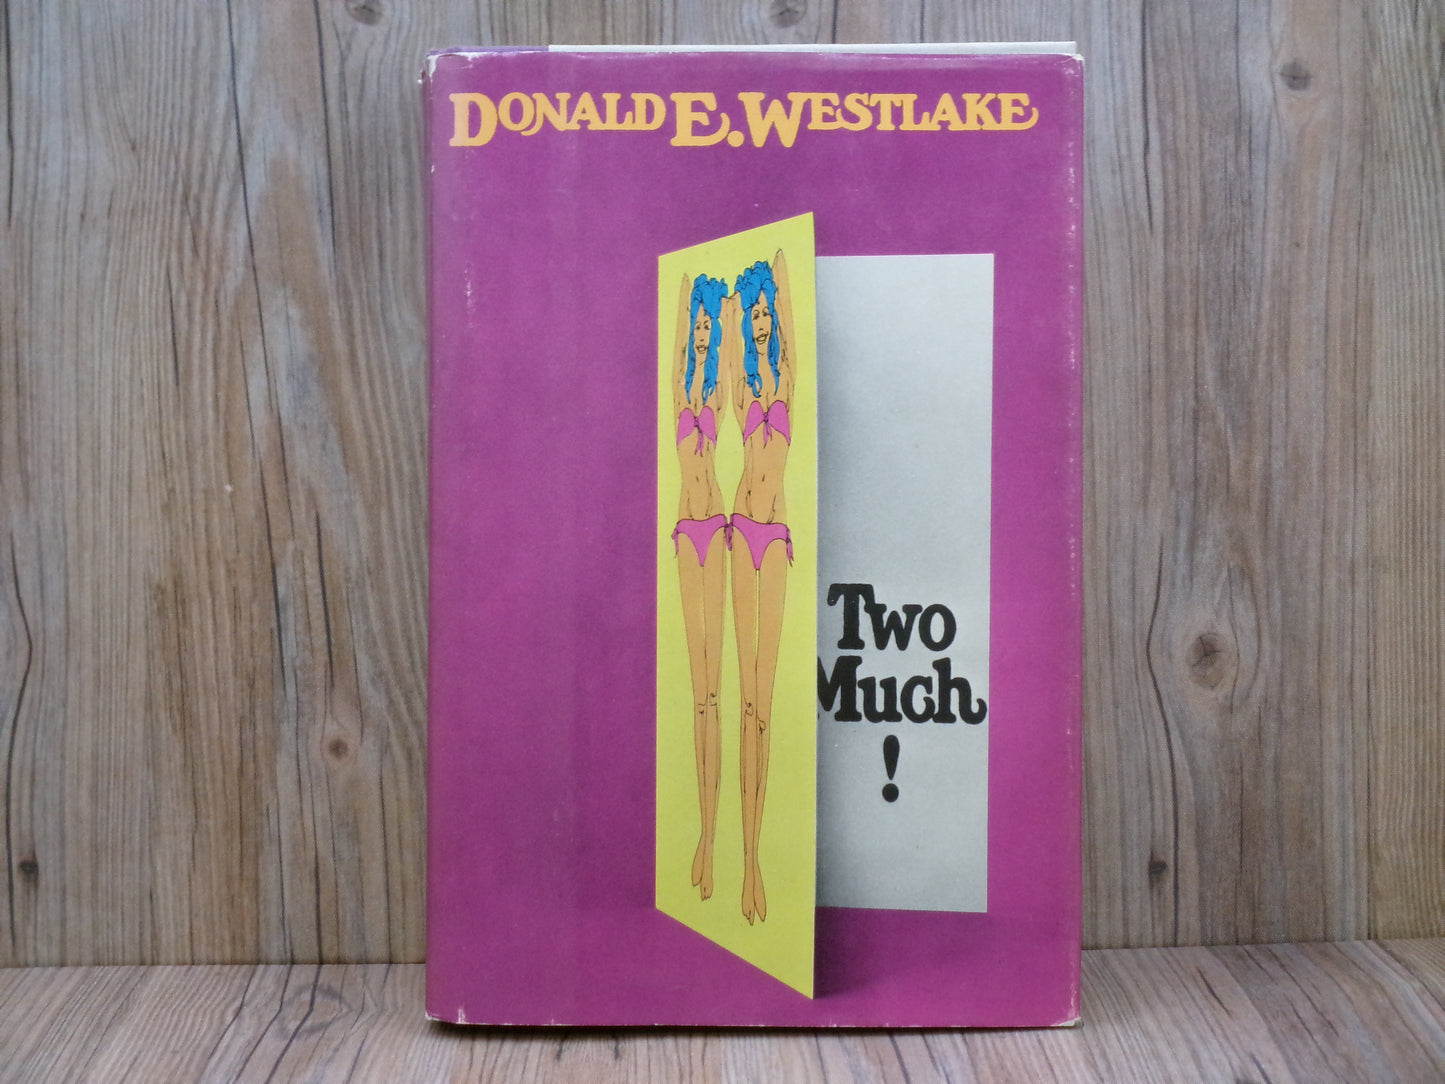 Two Much by Donald E. Westlake